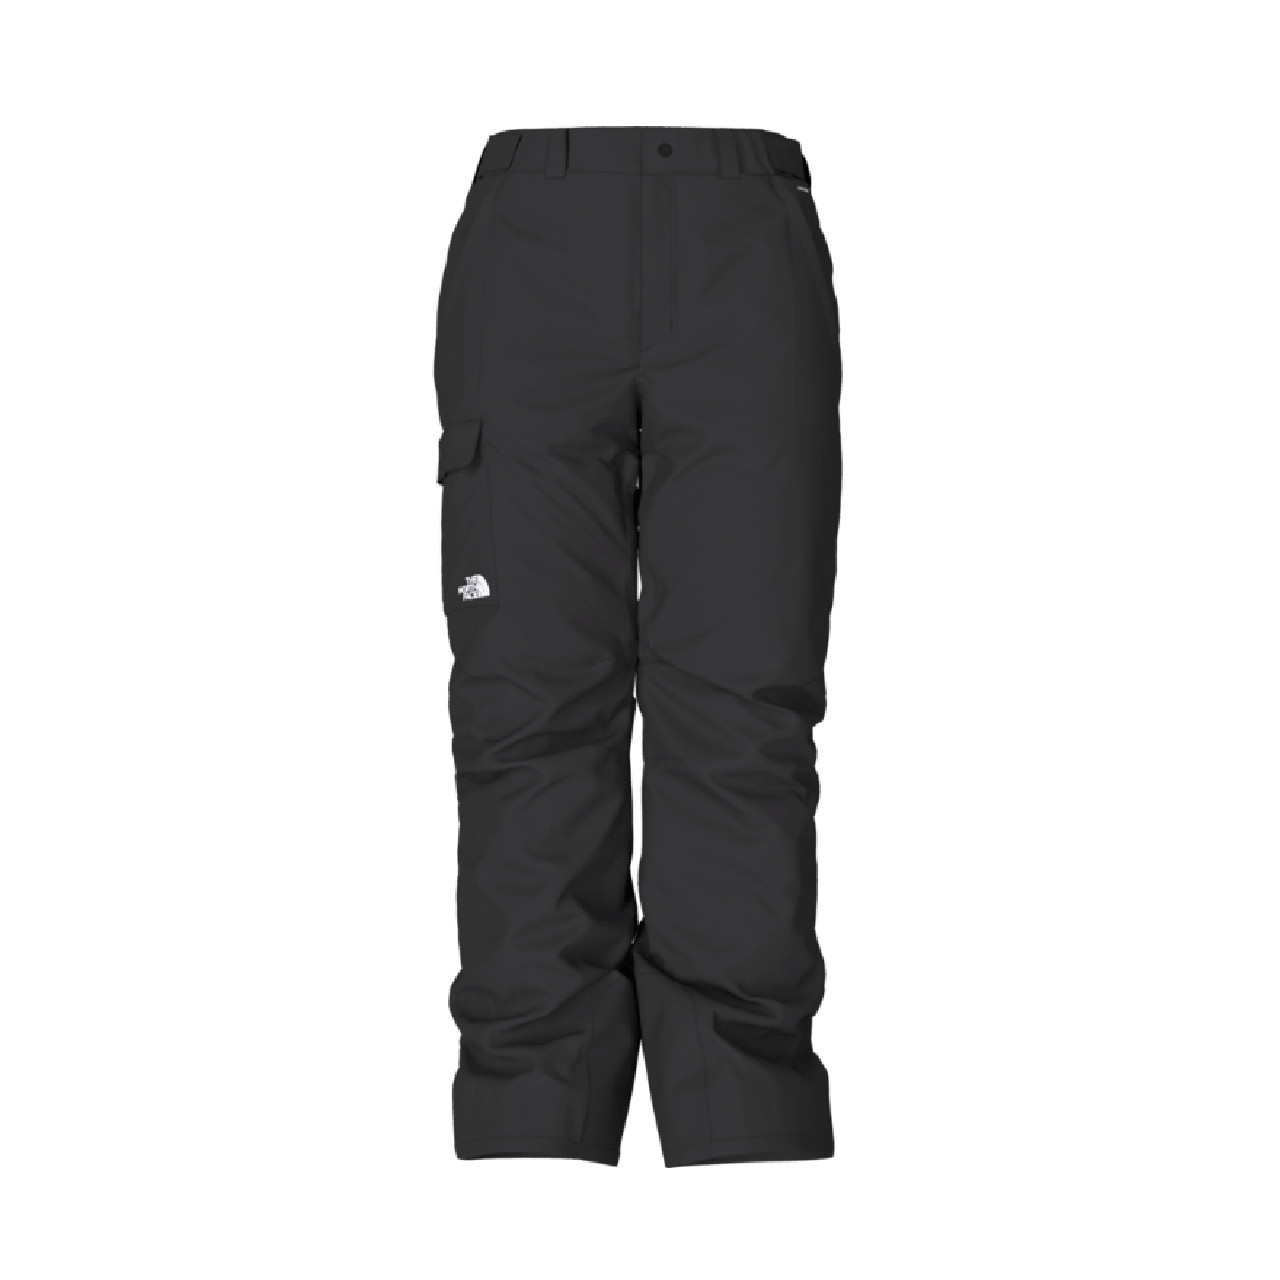 Expert Review: The North Face Men's Freedom Insulated Pants